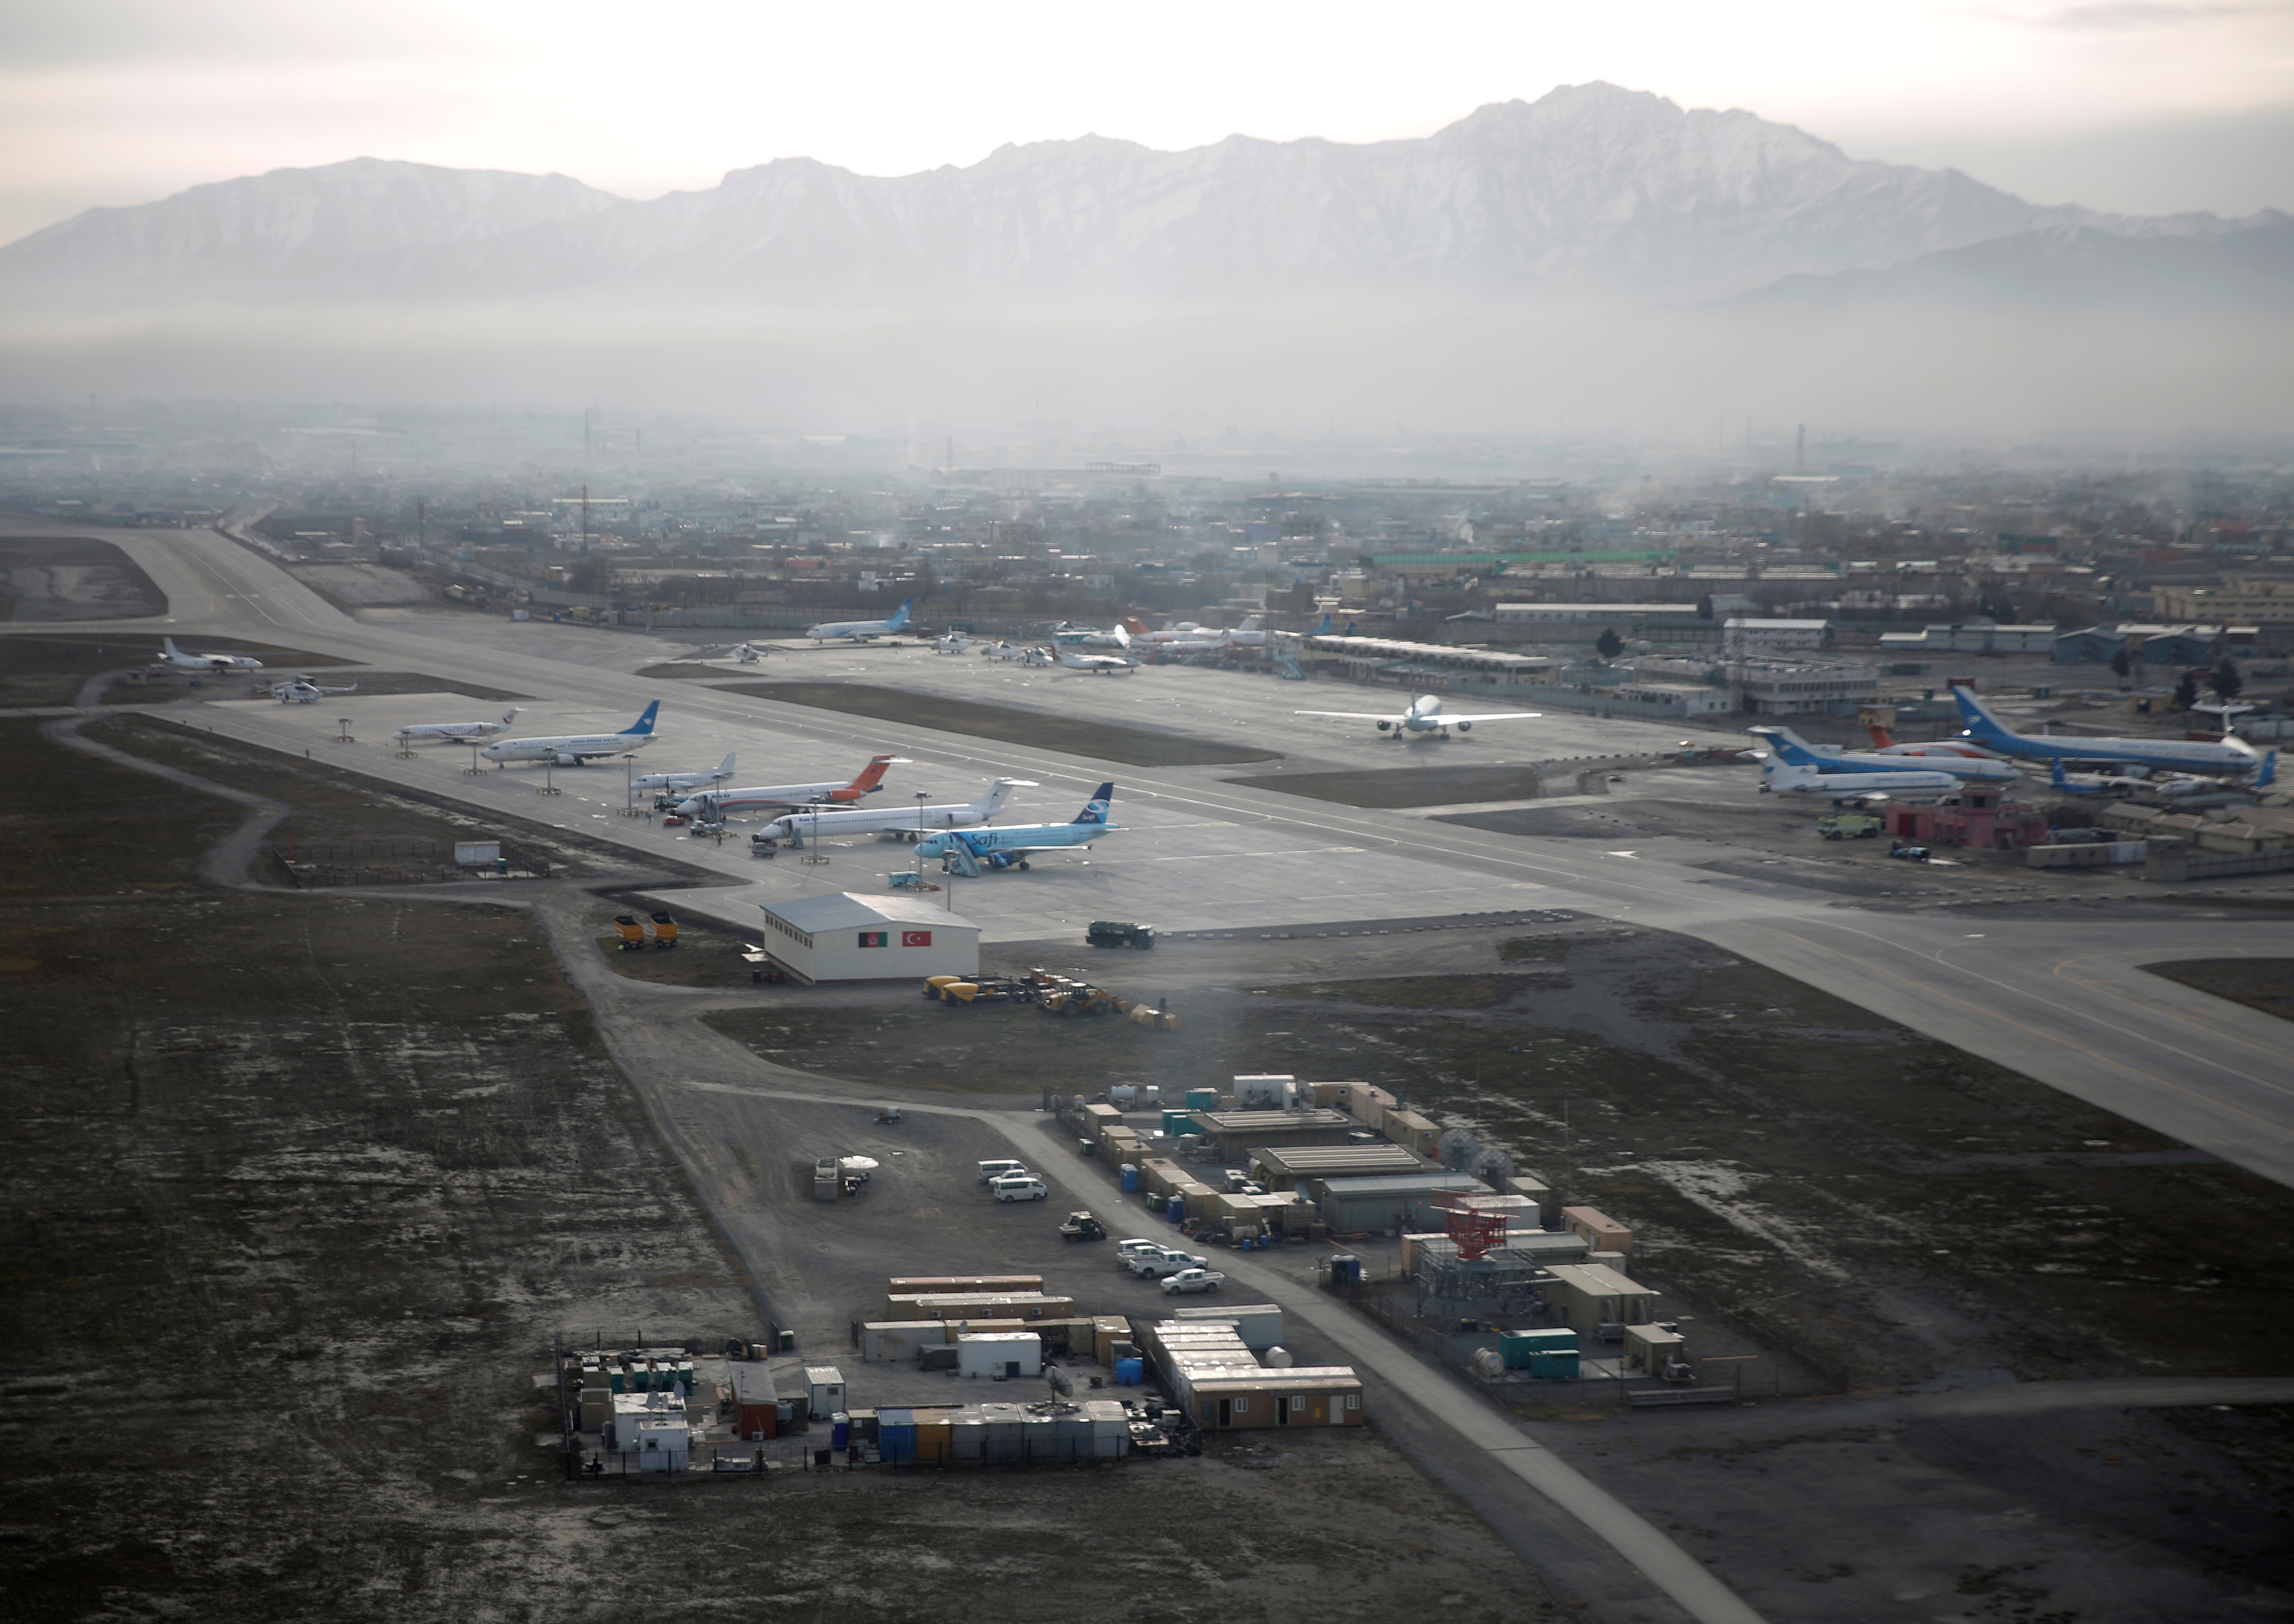 An aerial view of the Hamid Karzai International Airport in Kabul